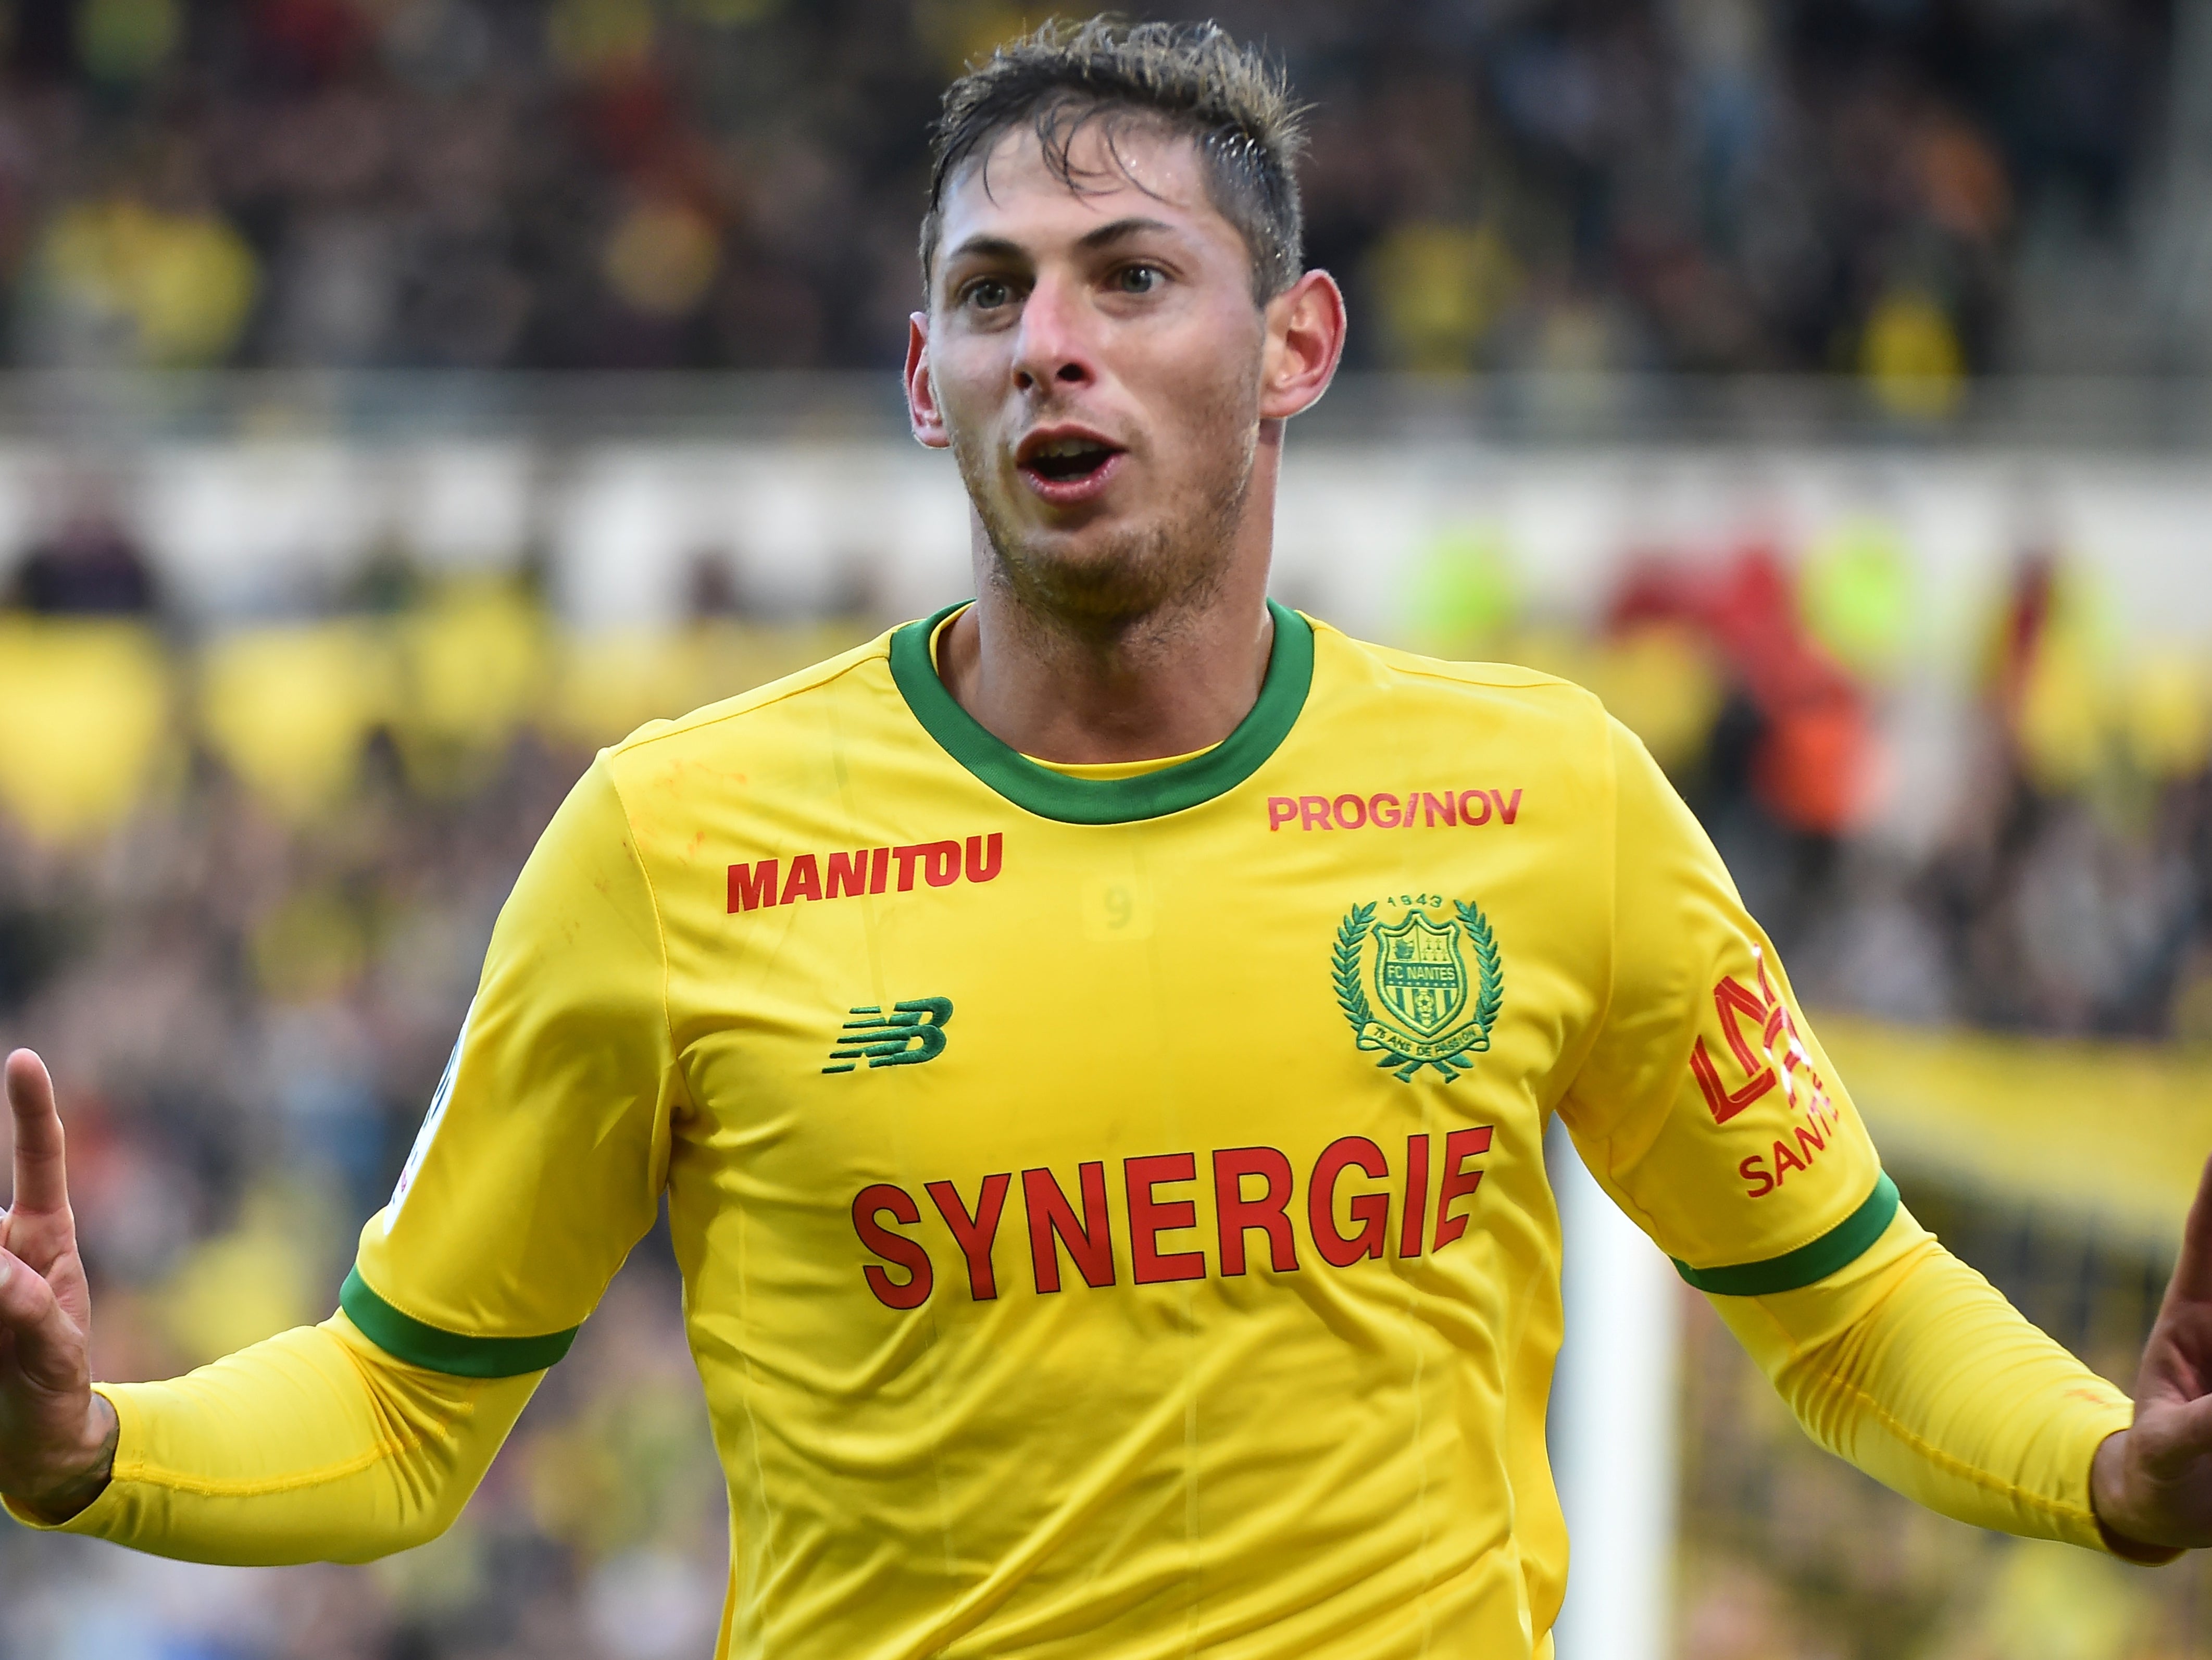 Argentinian Premier League footballer Emiliano Sala died when the private plane he was travelling in crashed in the English Channel in 2019